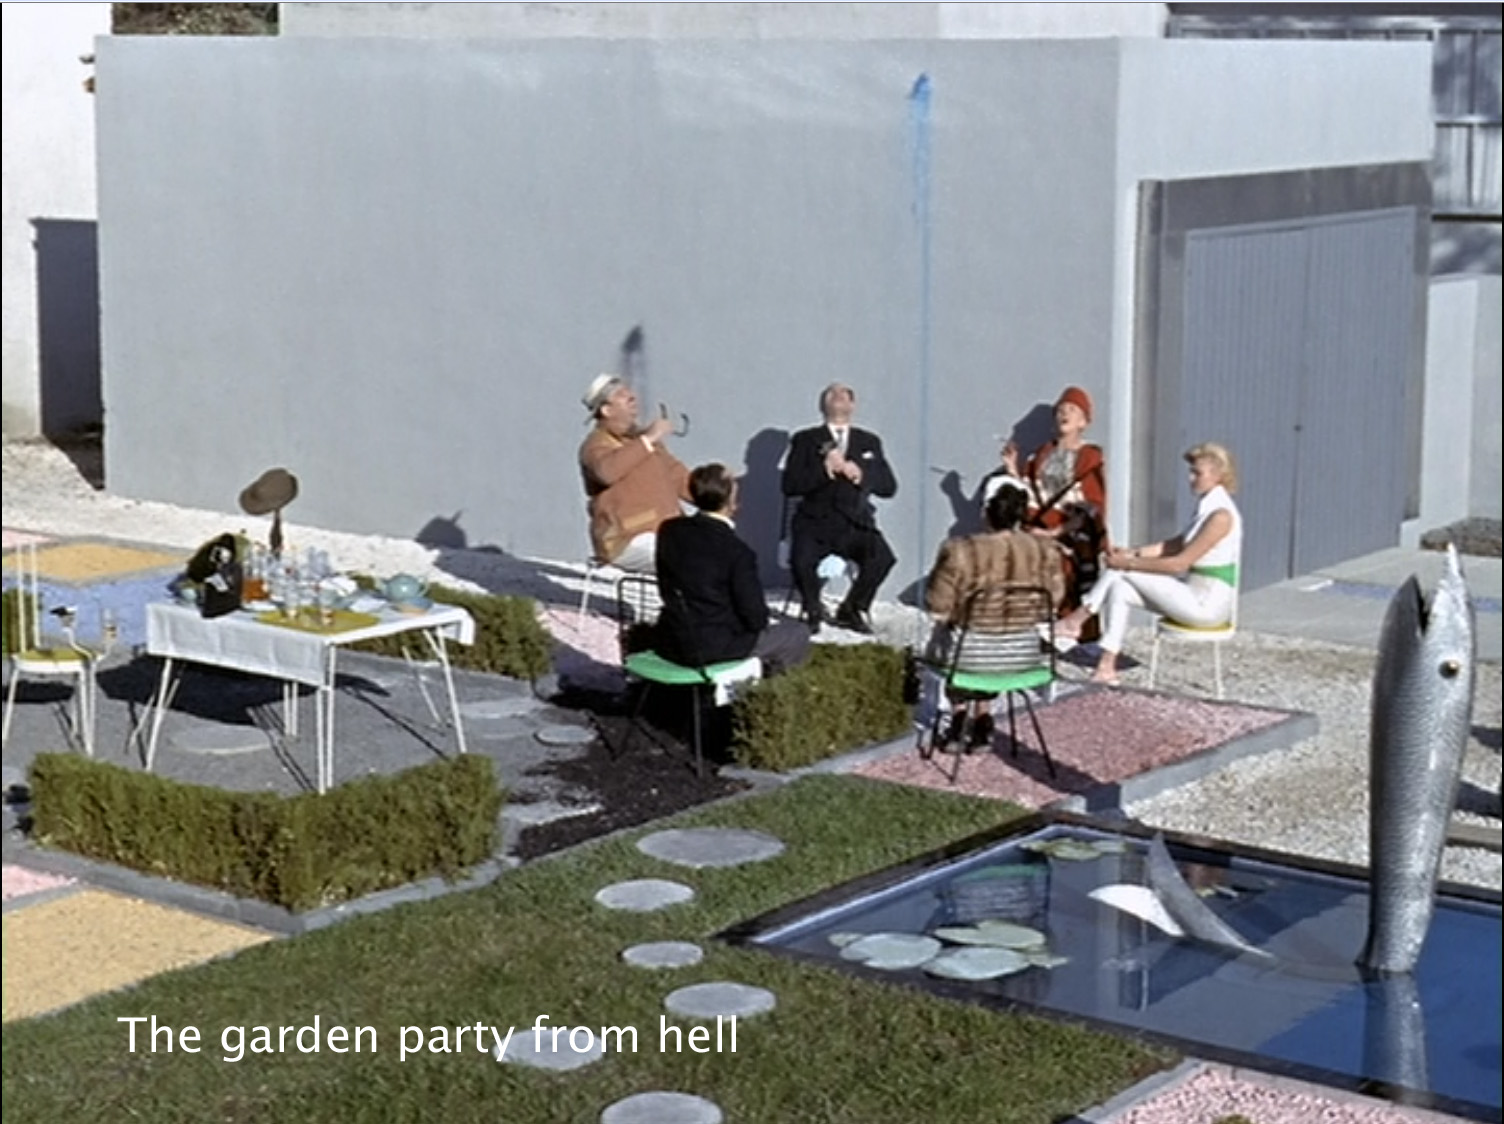 The garden party from hell